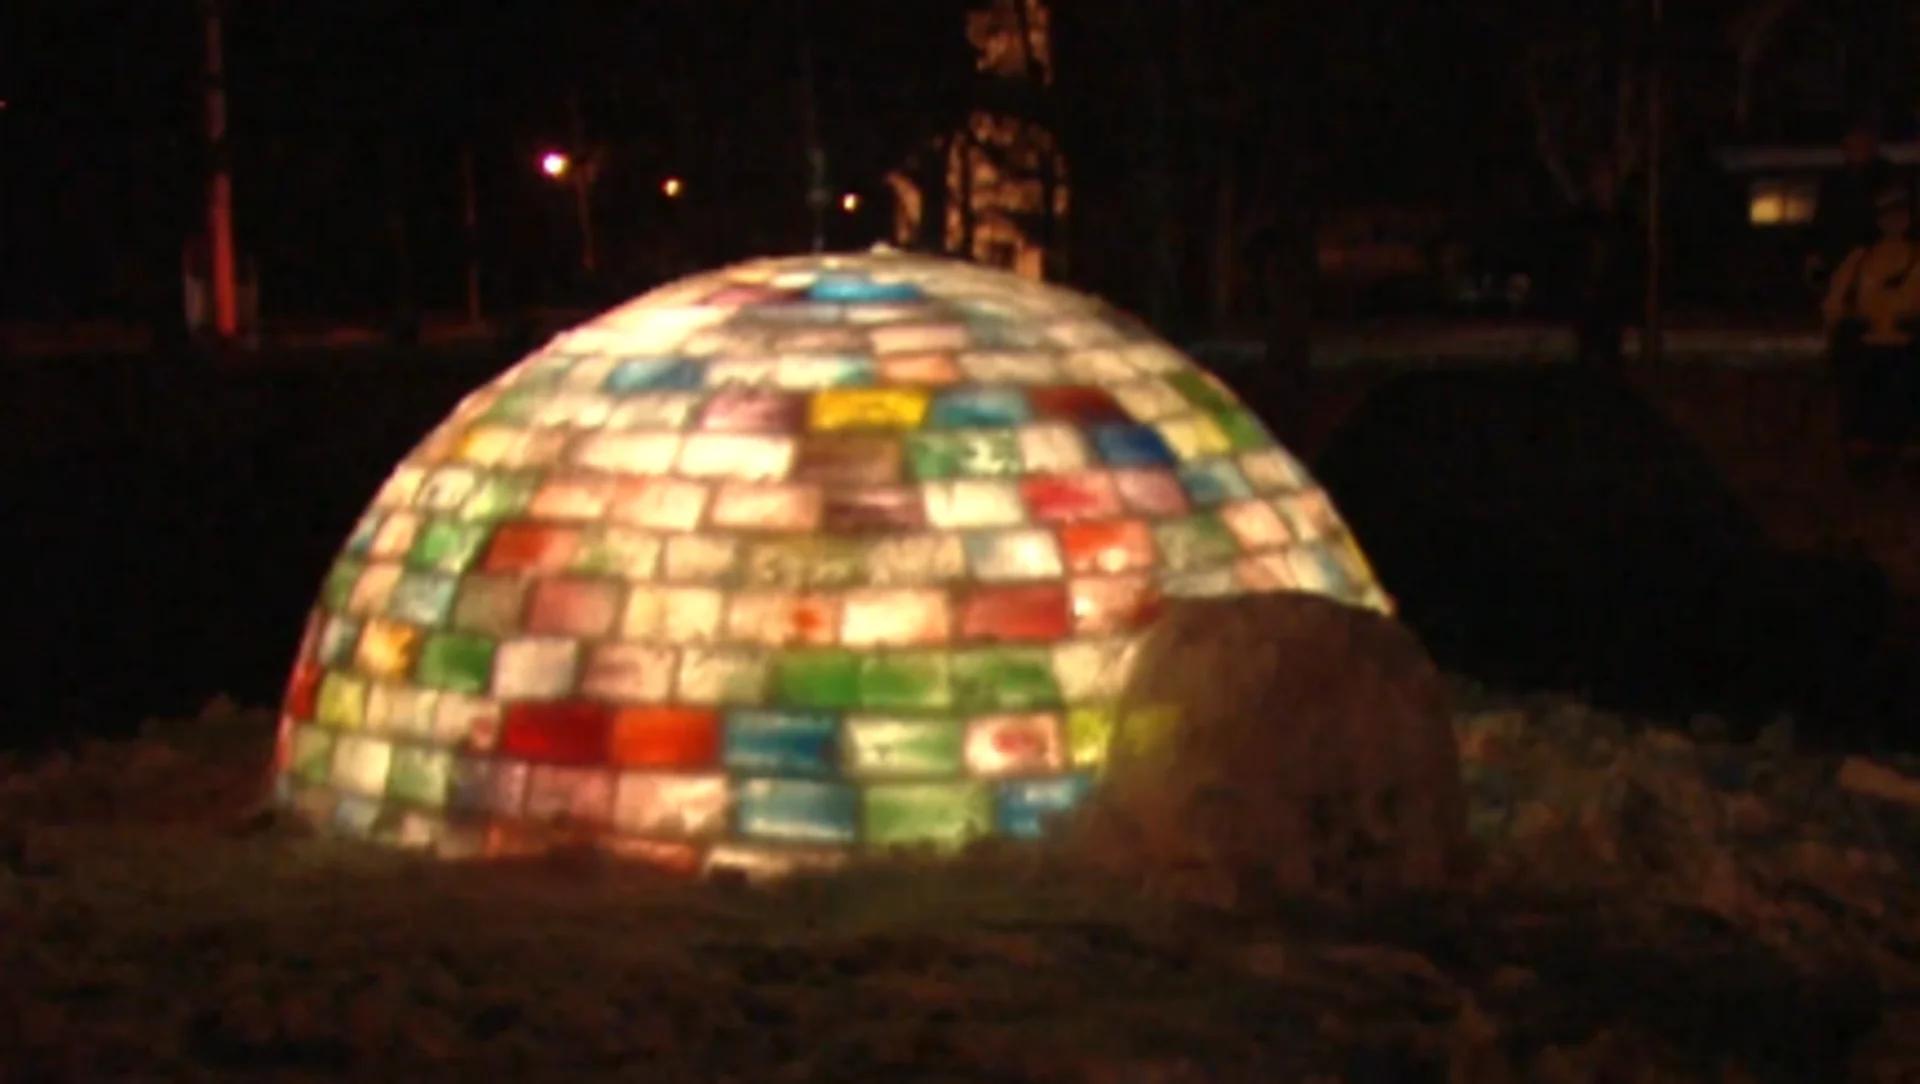 How to build your own rainbow igloo